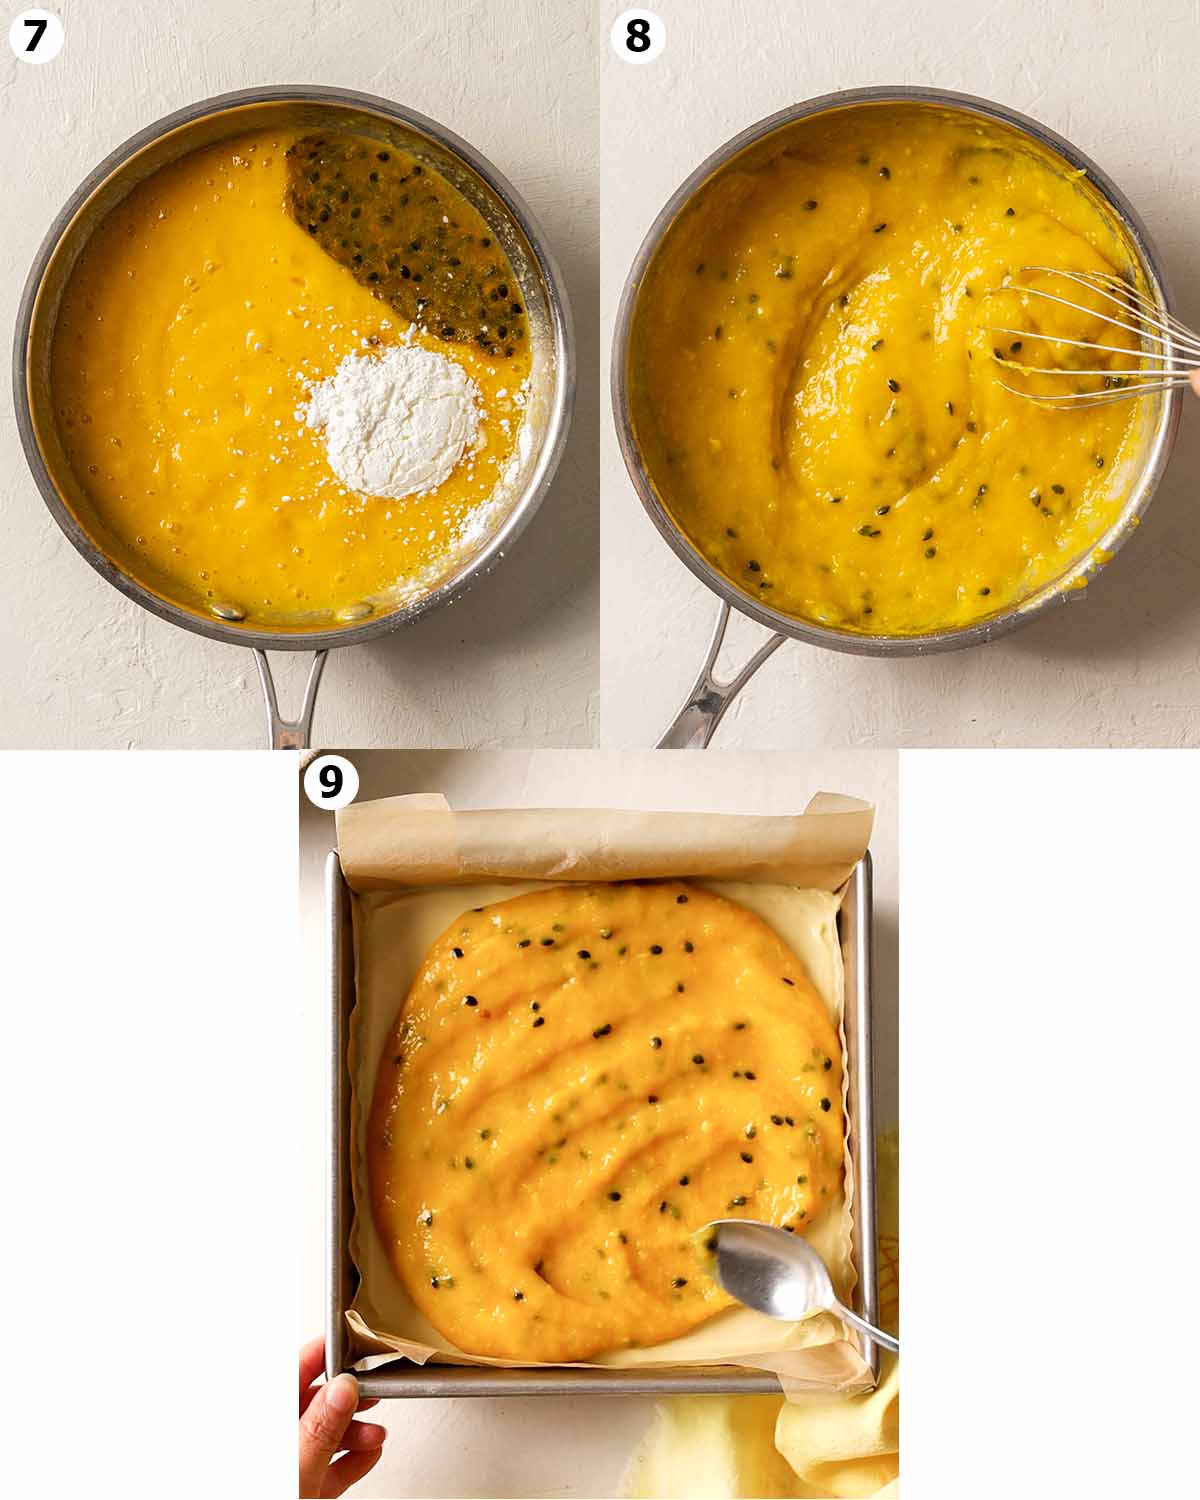 Three image collage showing how to make the mango curd for the cheesecake.